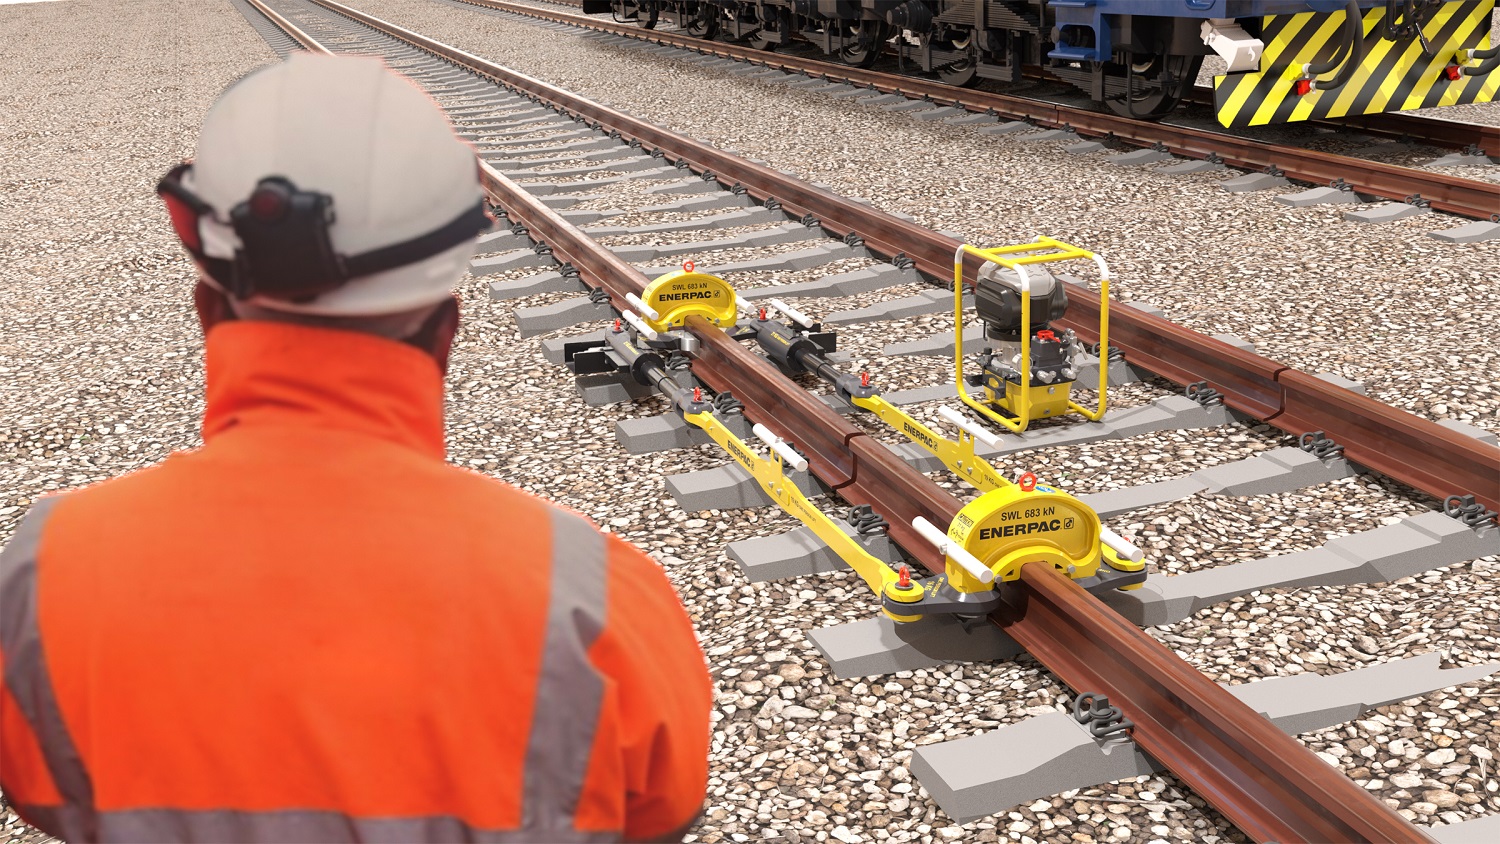 The Enerpac RP-70A hydraulic rail stressor and ZC3-Series battery powered stressing pump provide a cordless, zero emission, rail stressor kit for rail track thermite welding.